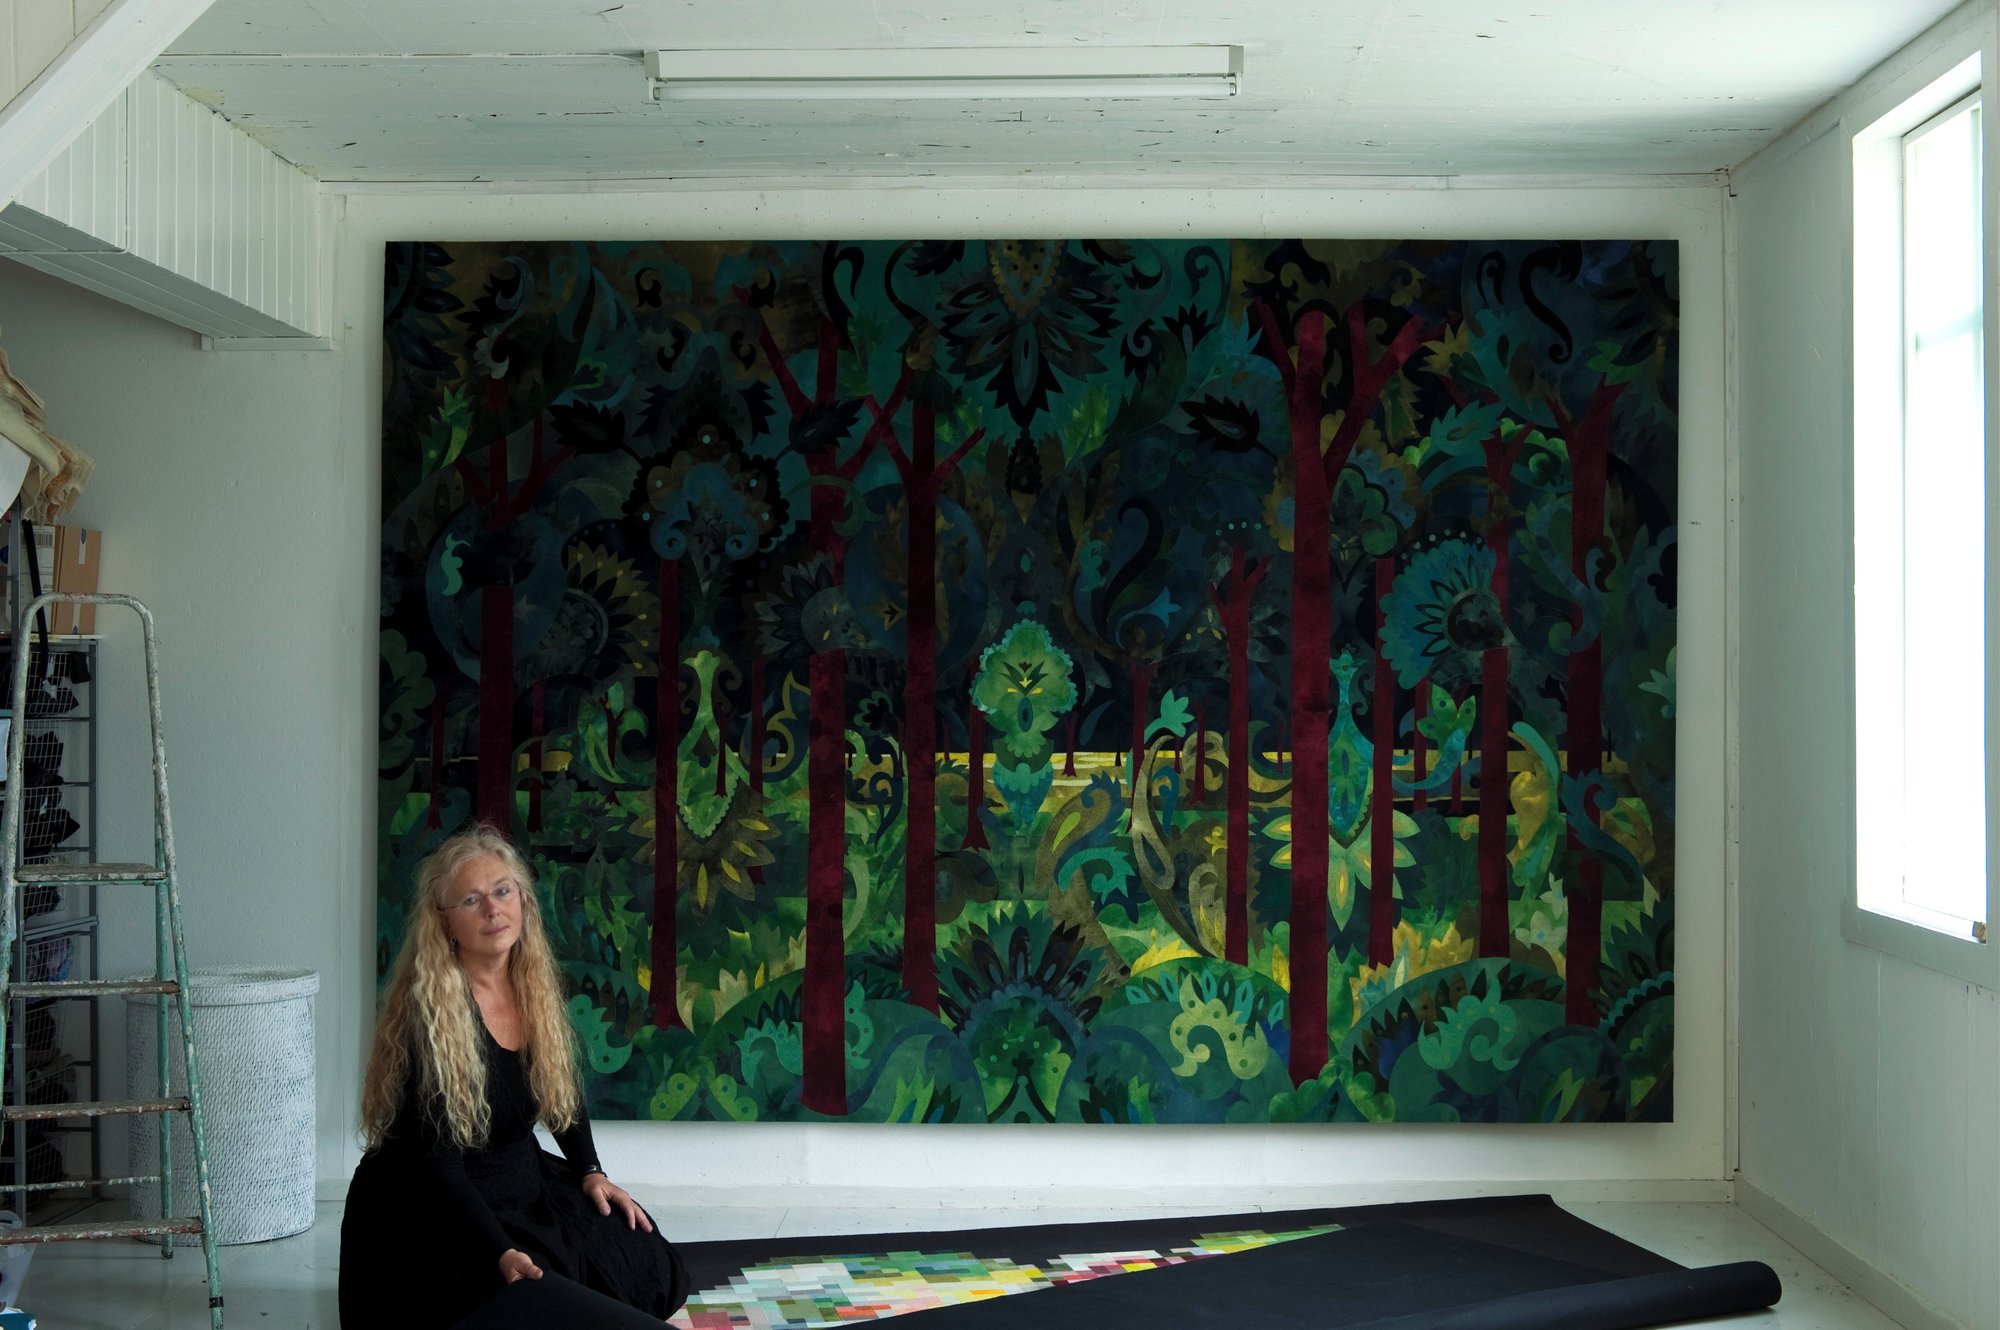 "The Forest" and Inger Johanne Rasmussen in her studio at Hovedøya.